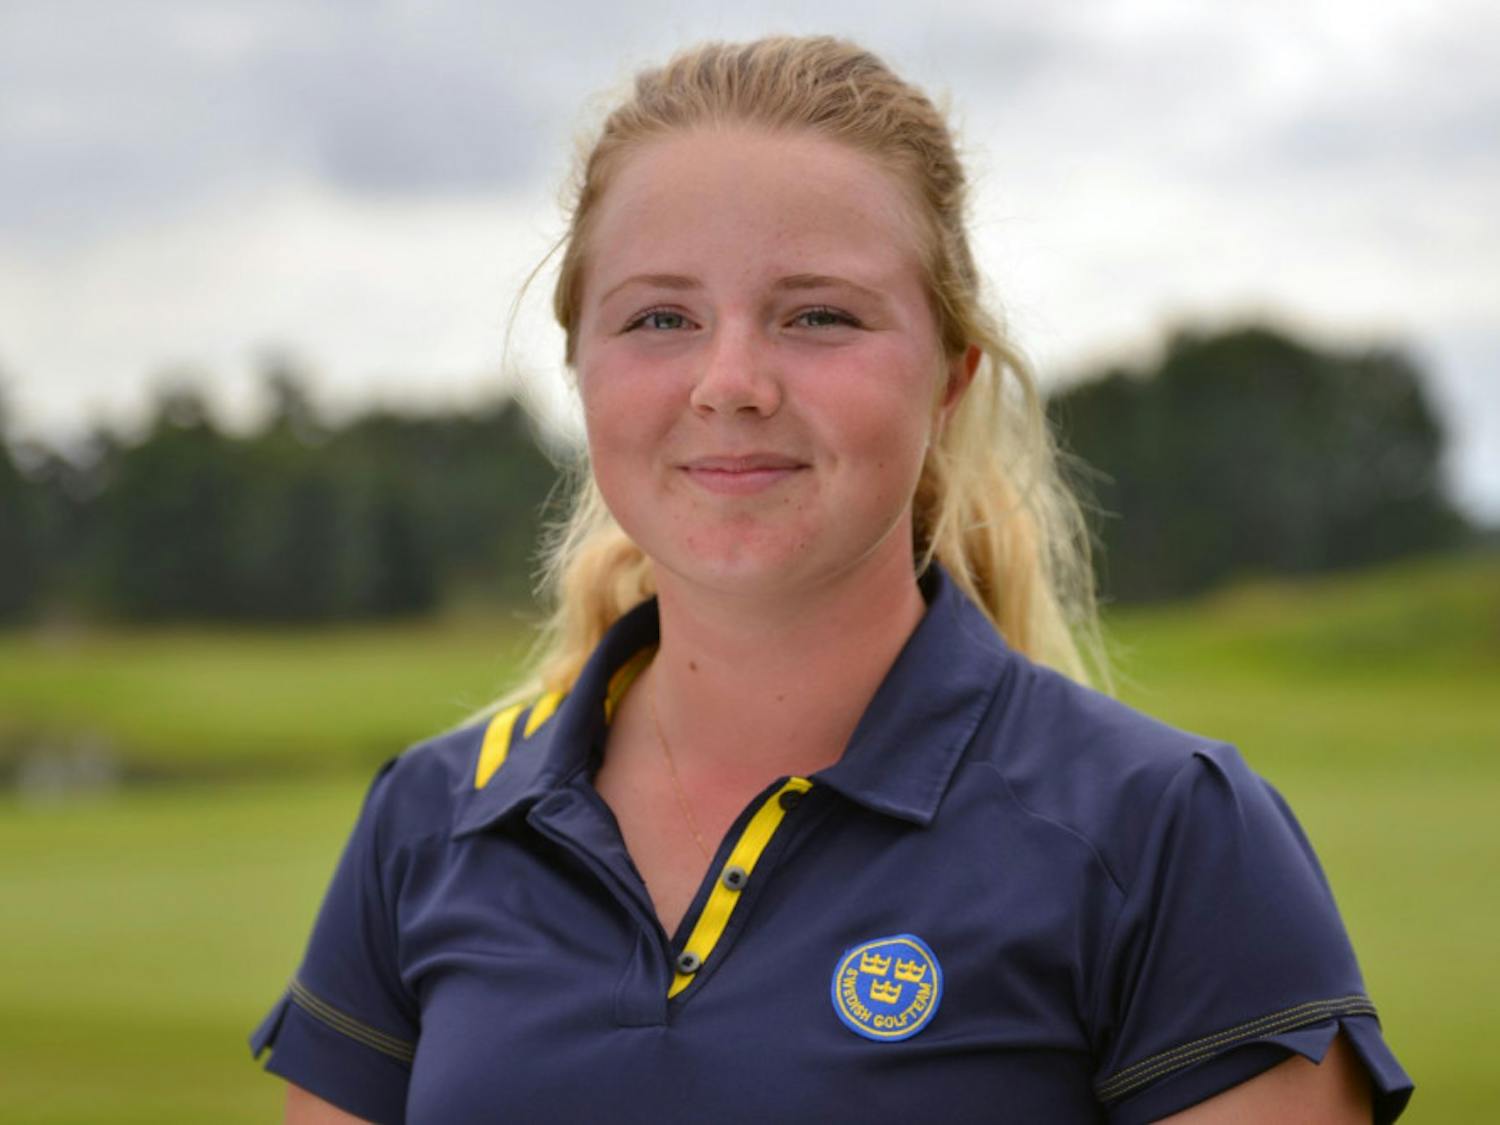 Elin Esborn finished in fifth place in the Ocean Course Invitational after shooting 2 under par in the tournament.